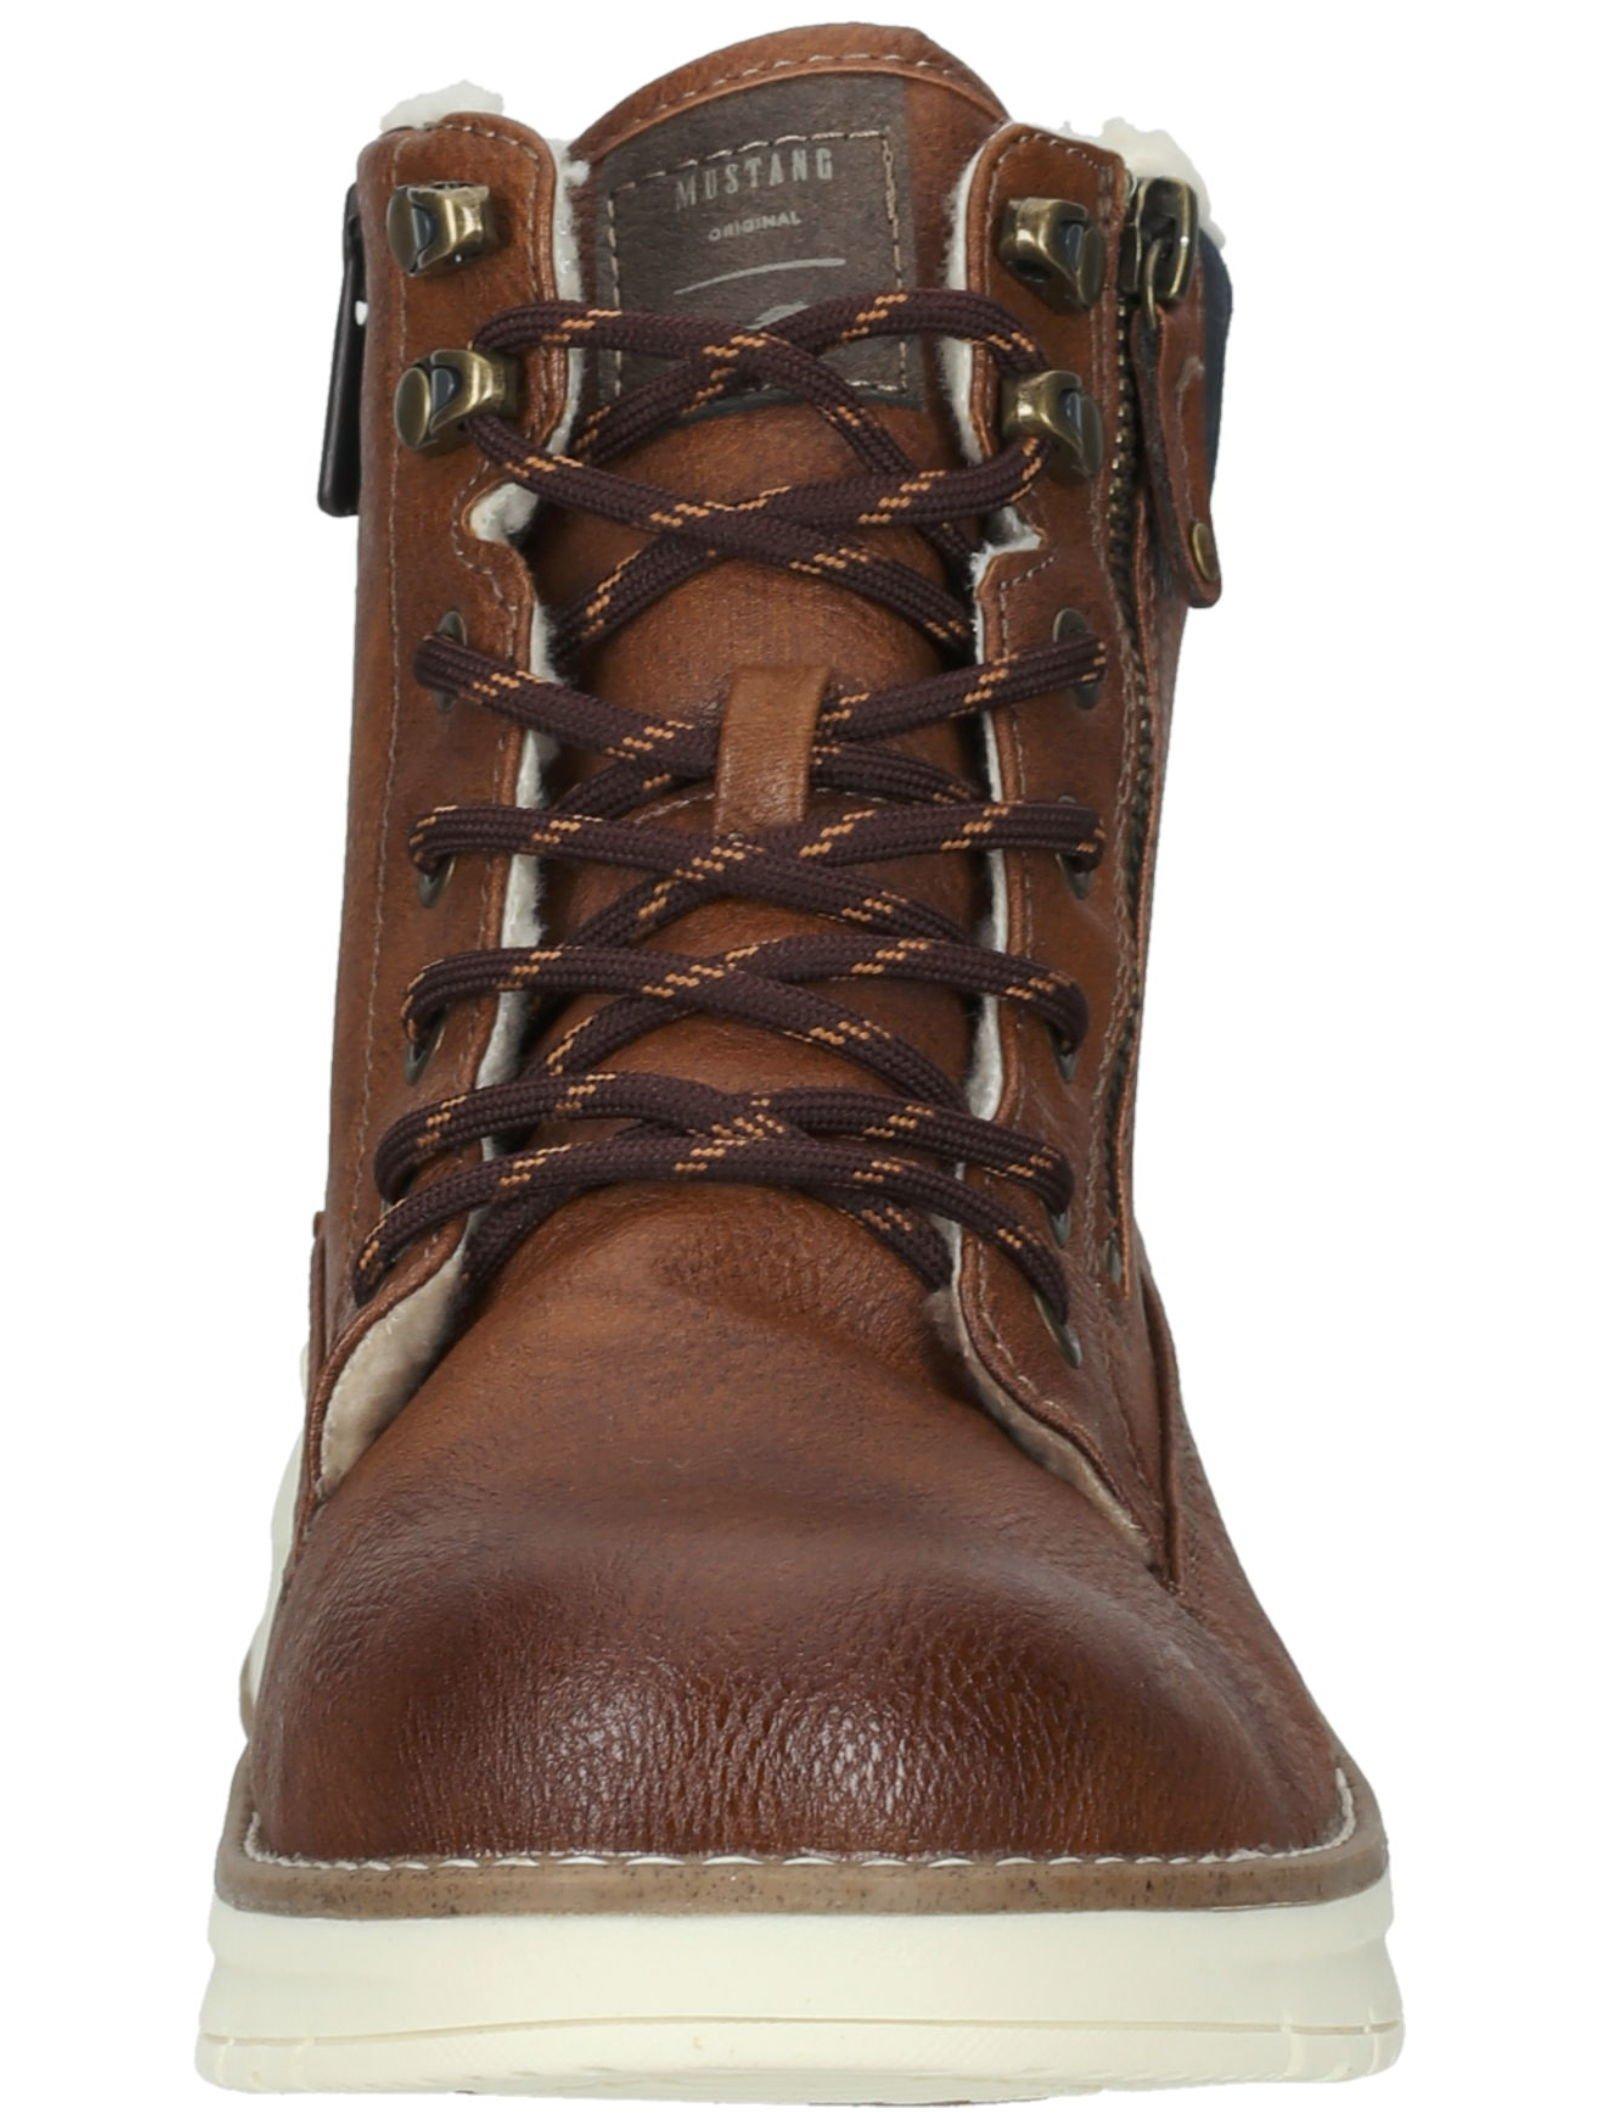 Mustang  Stiefelette 4161-603 